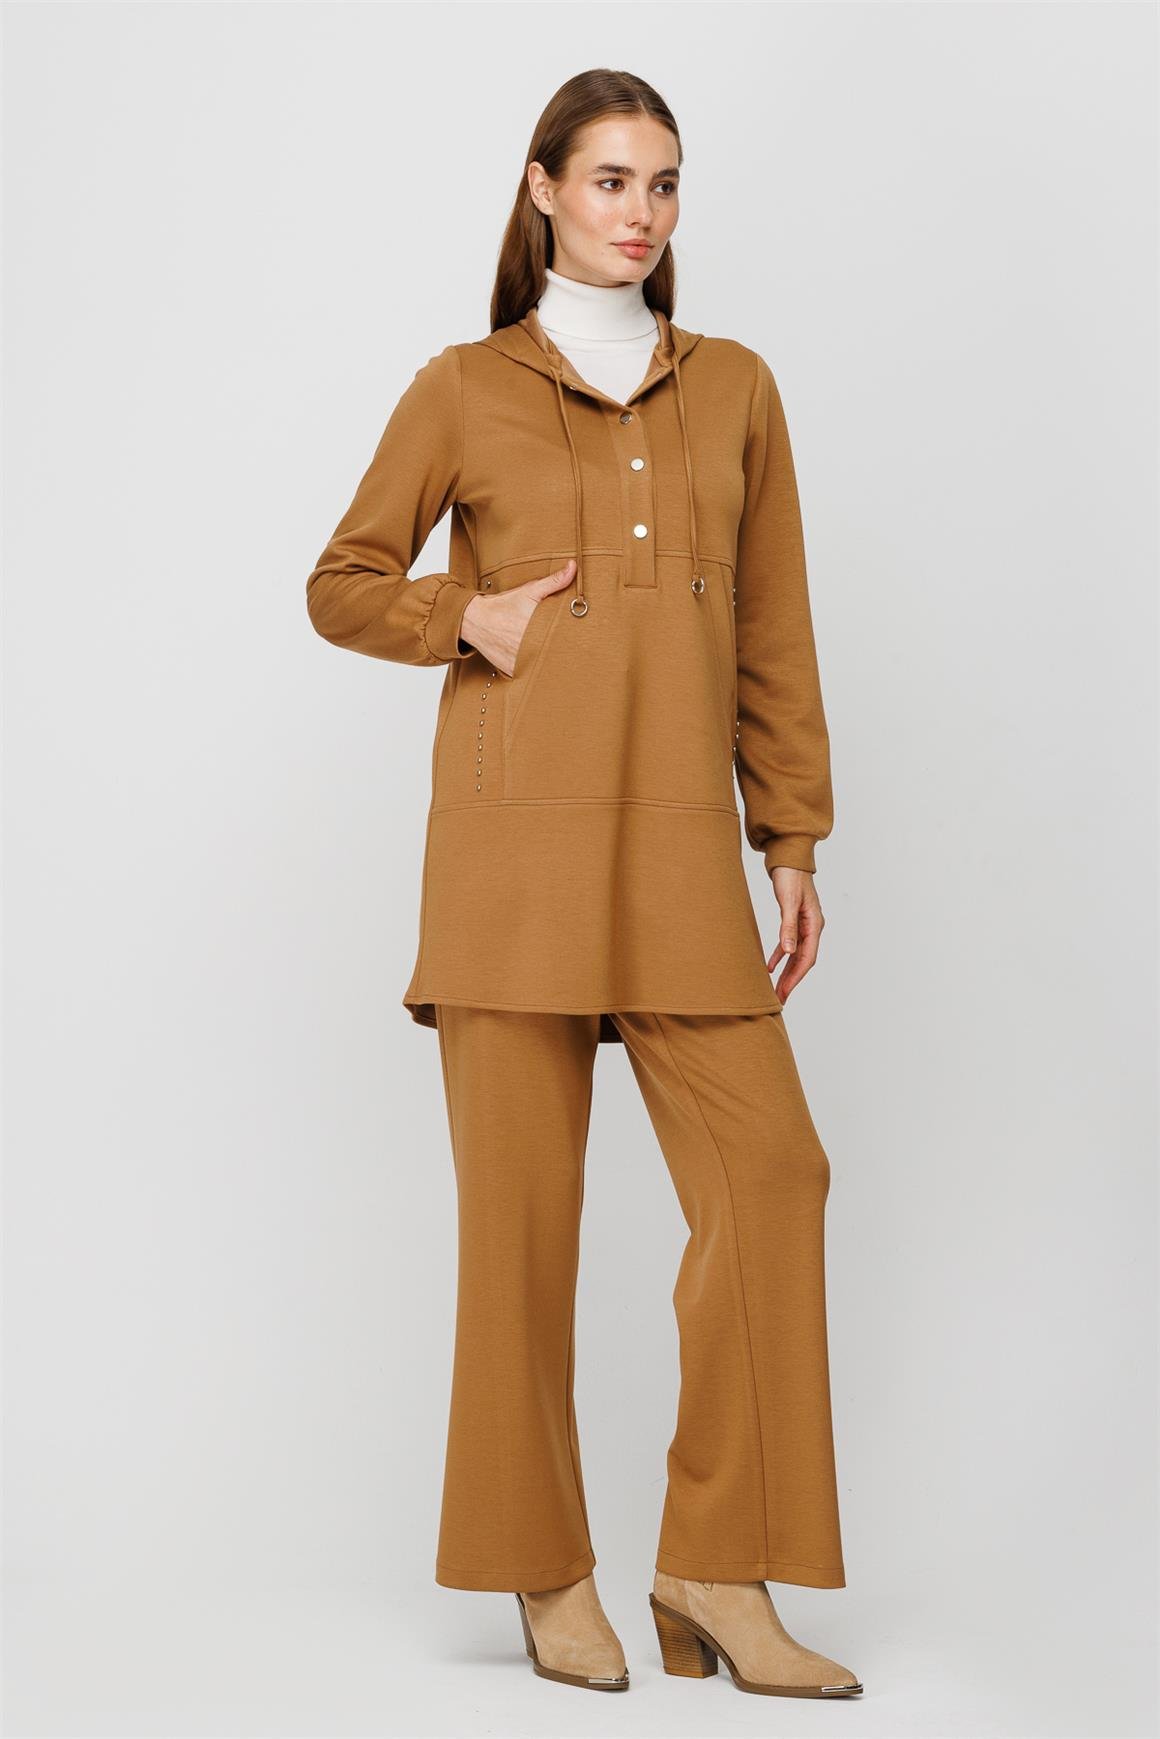 Oysh Fabric Tunic Trousers Set with Hood and Swarows Stone Detail - Camel